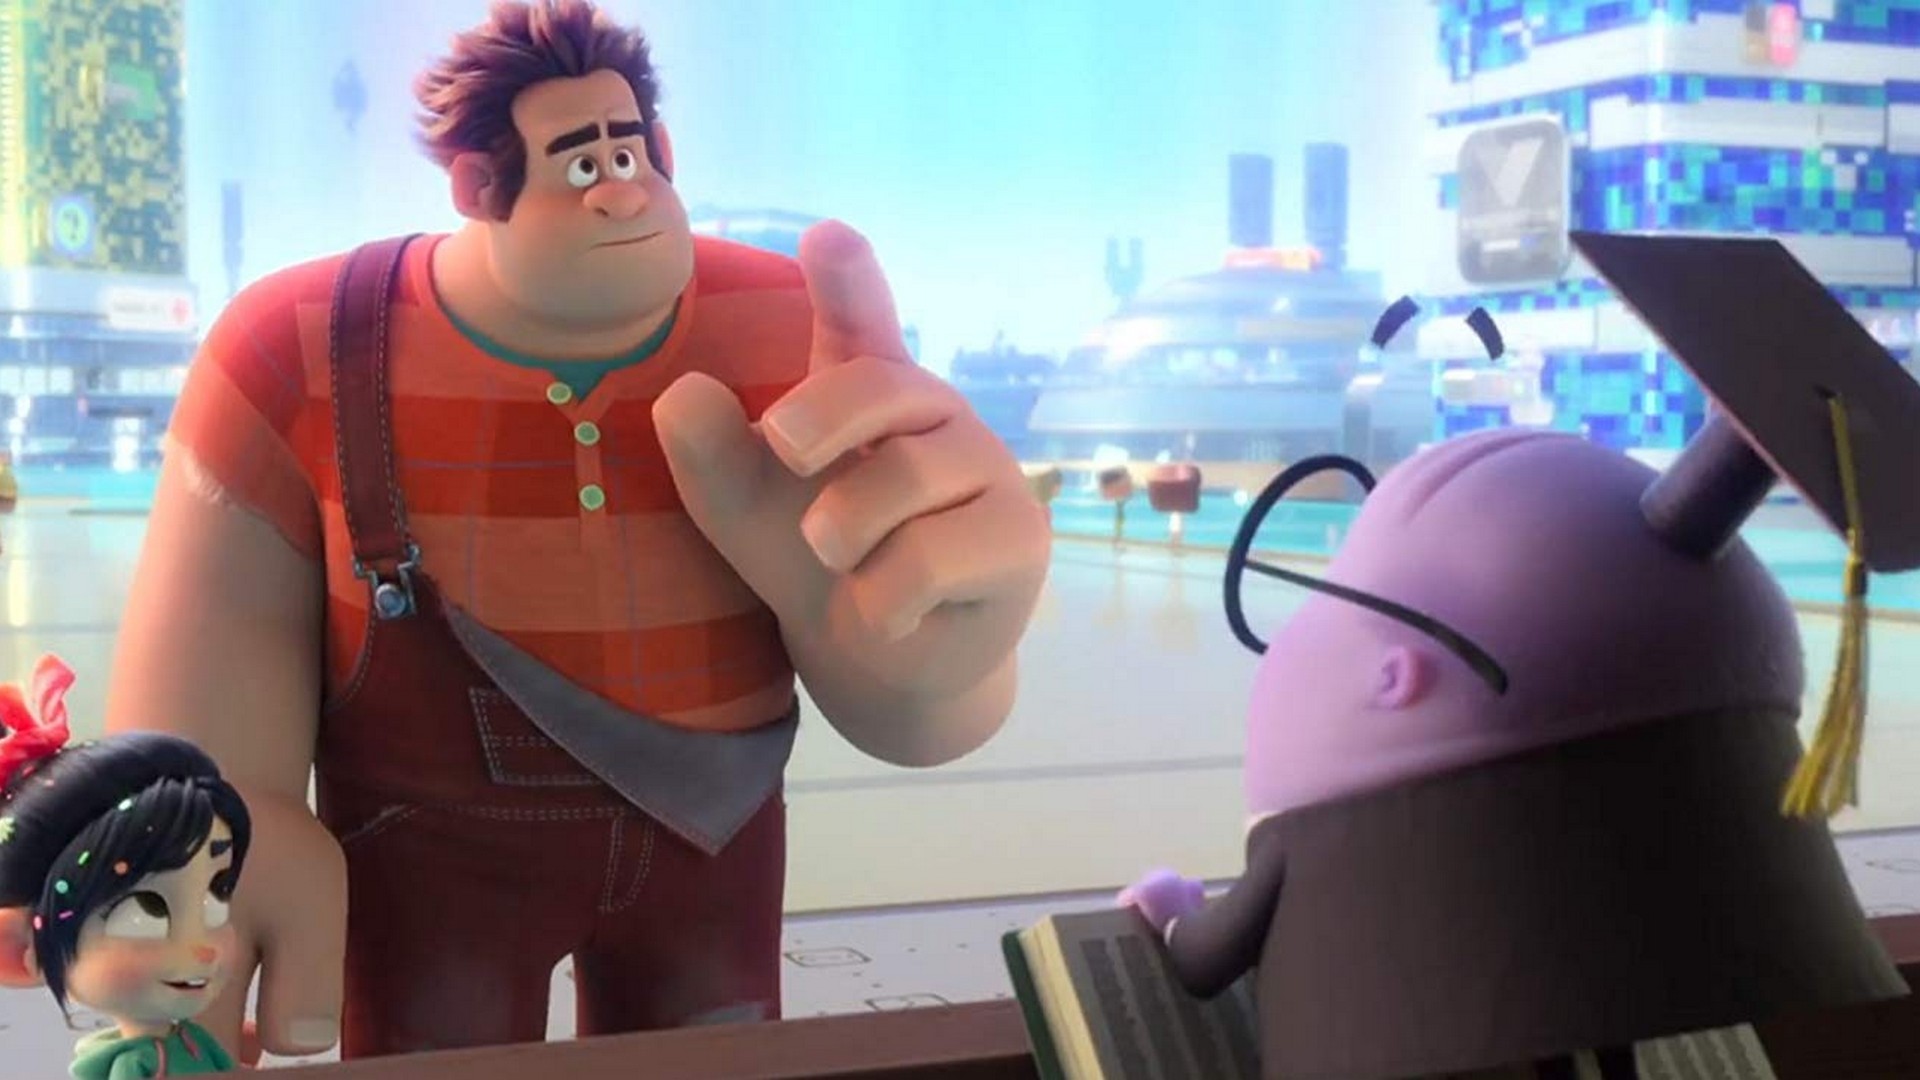 Wreck-It Ralph 2 2018 Wallpaper HD with resolution 1920x1080 pixel. You can make this wallpaper for your Mac or Windows Desktop Background, iPhone, Android or Tablet and another Smartphone device